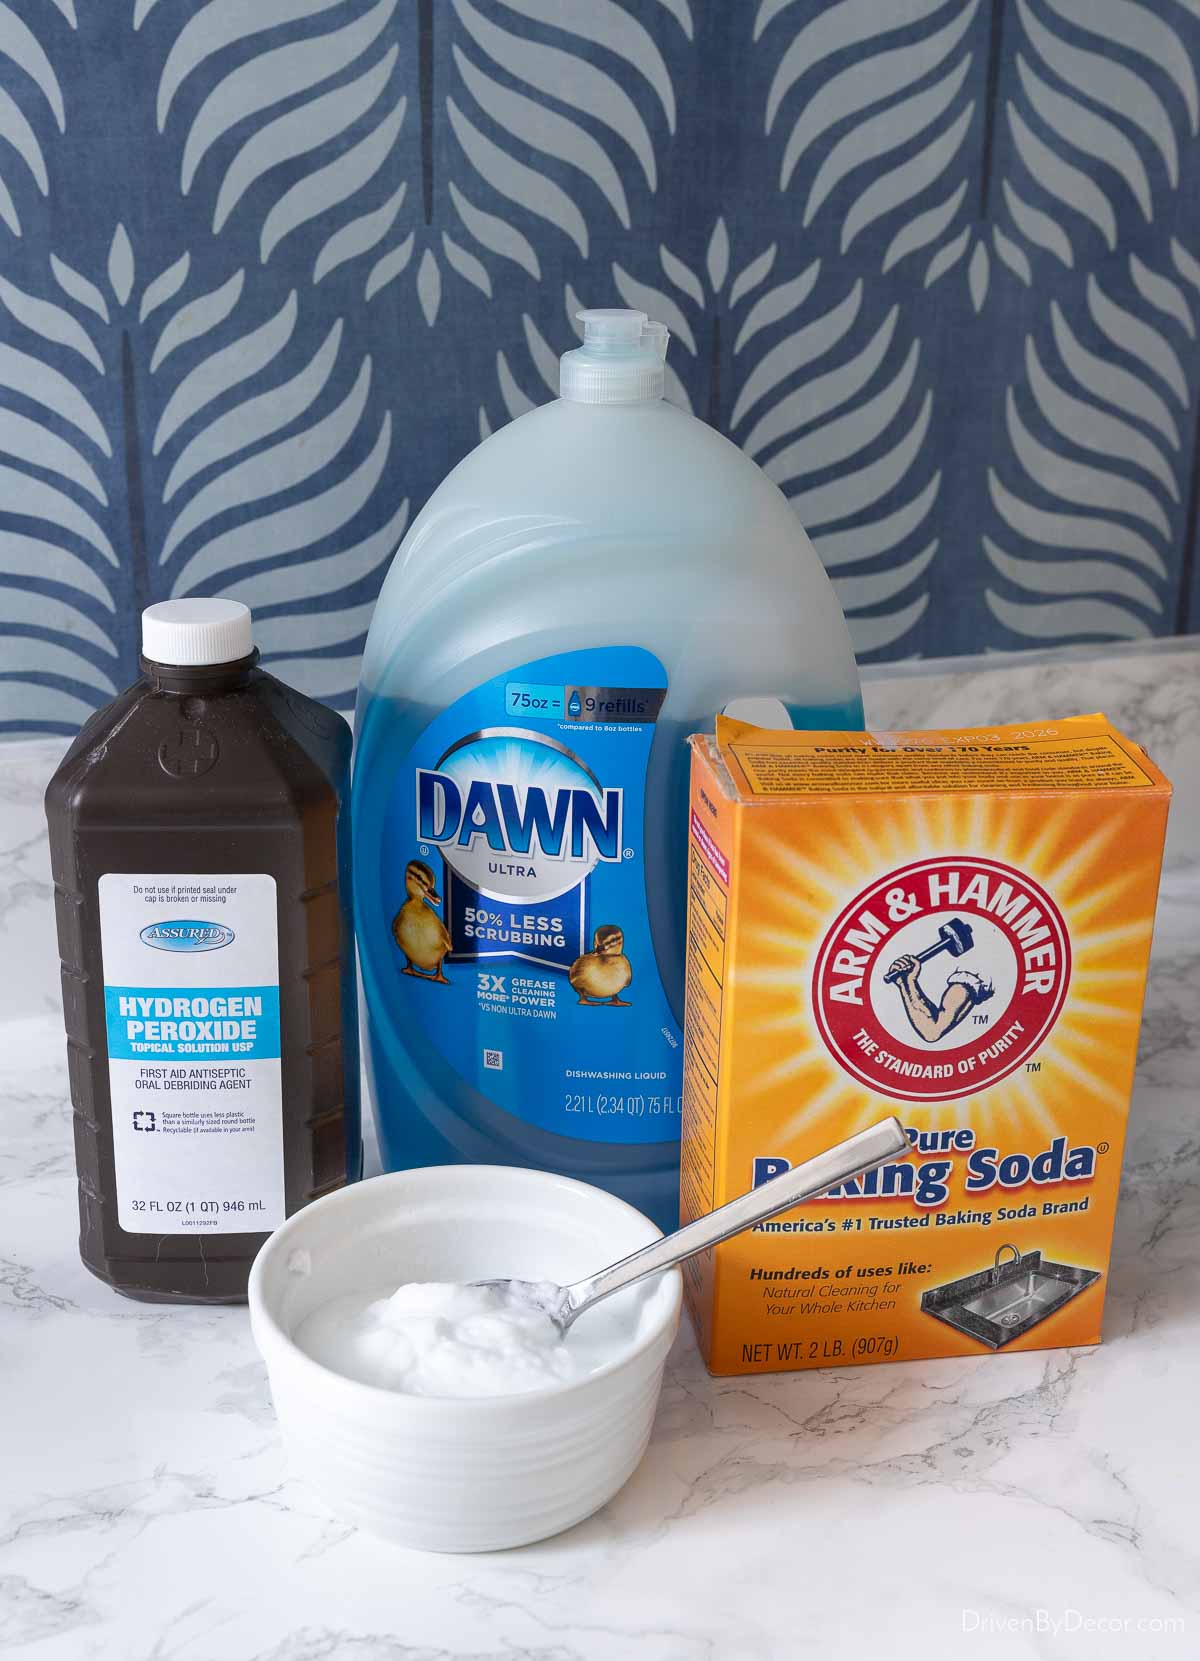 Baking soda, hydrogen peroxide, and dish detergent as a natural way to clean grout